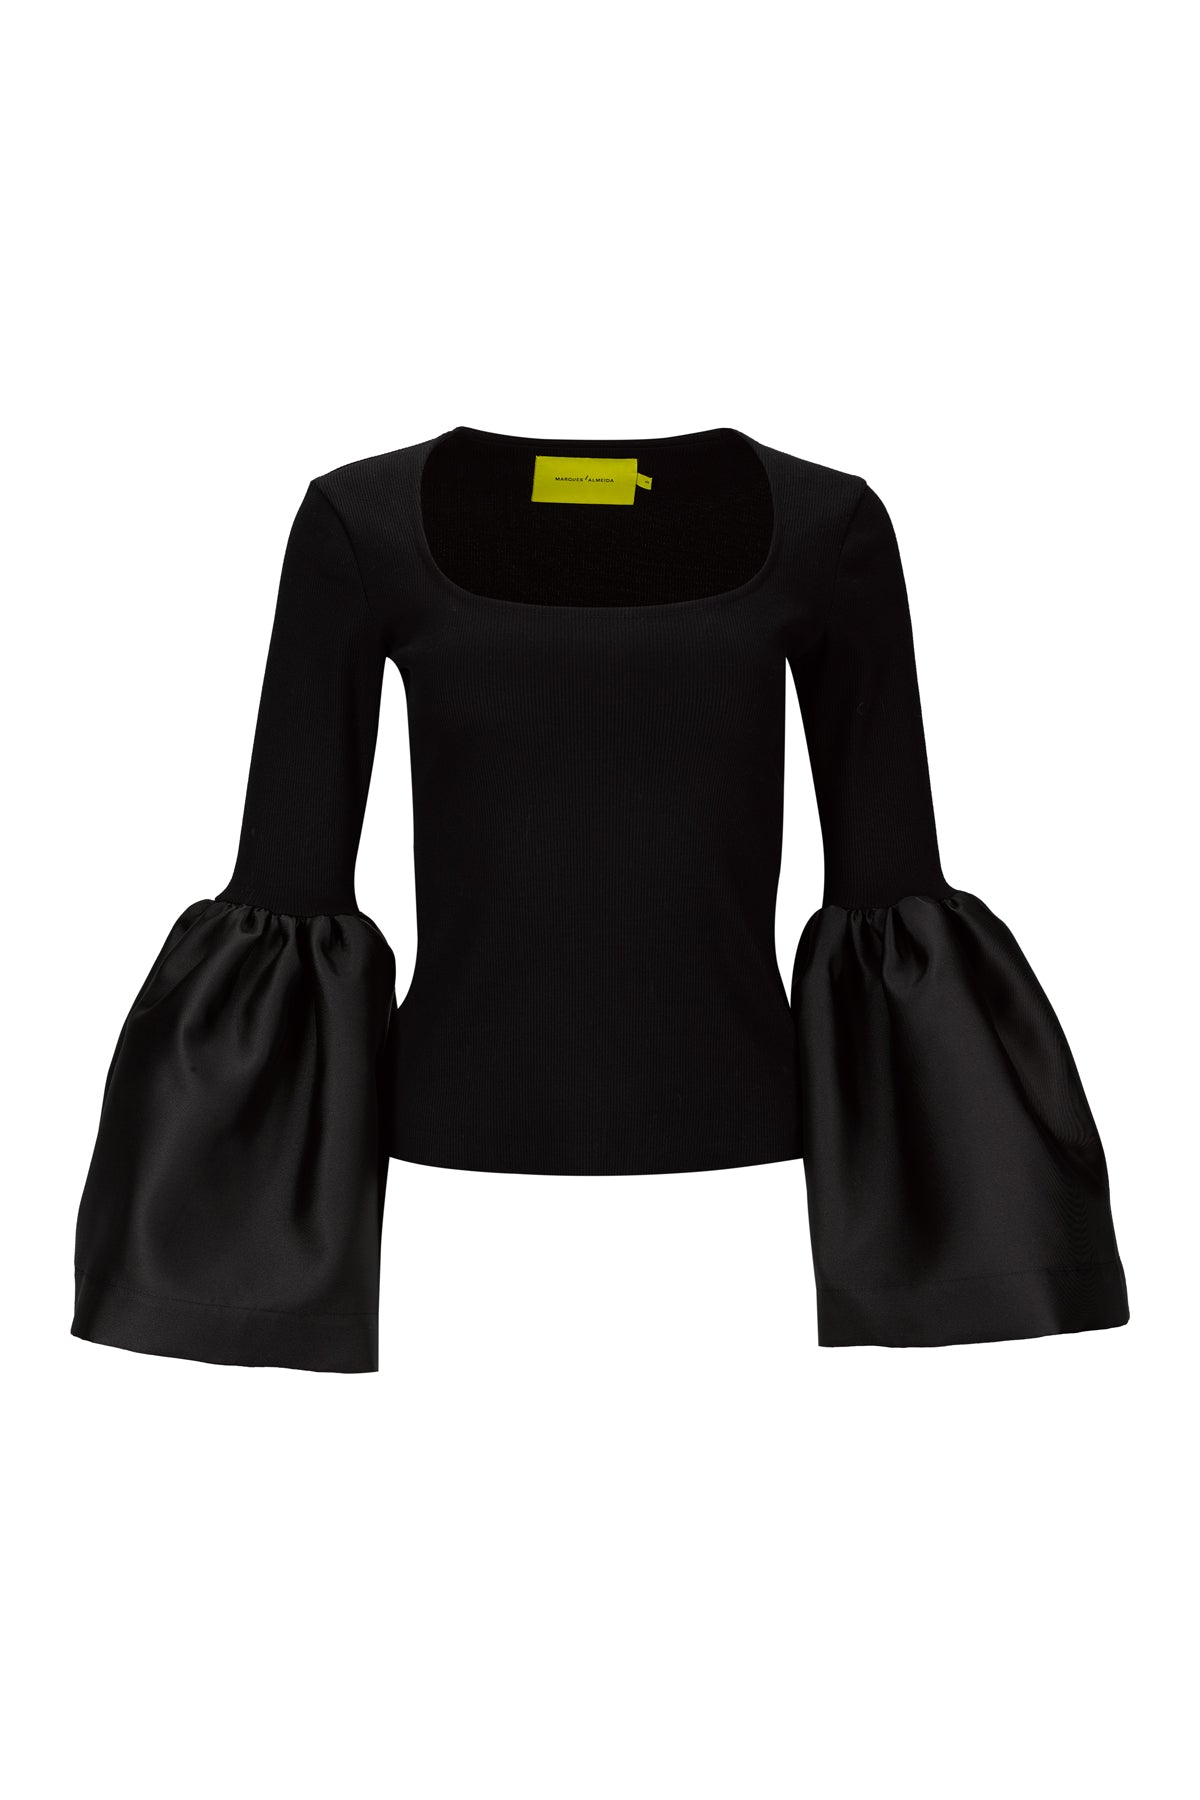 BLACK SCOOPED NECK PUFF SLEEVE TOP marques almeida